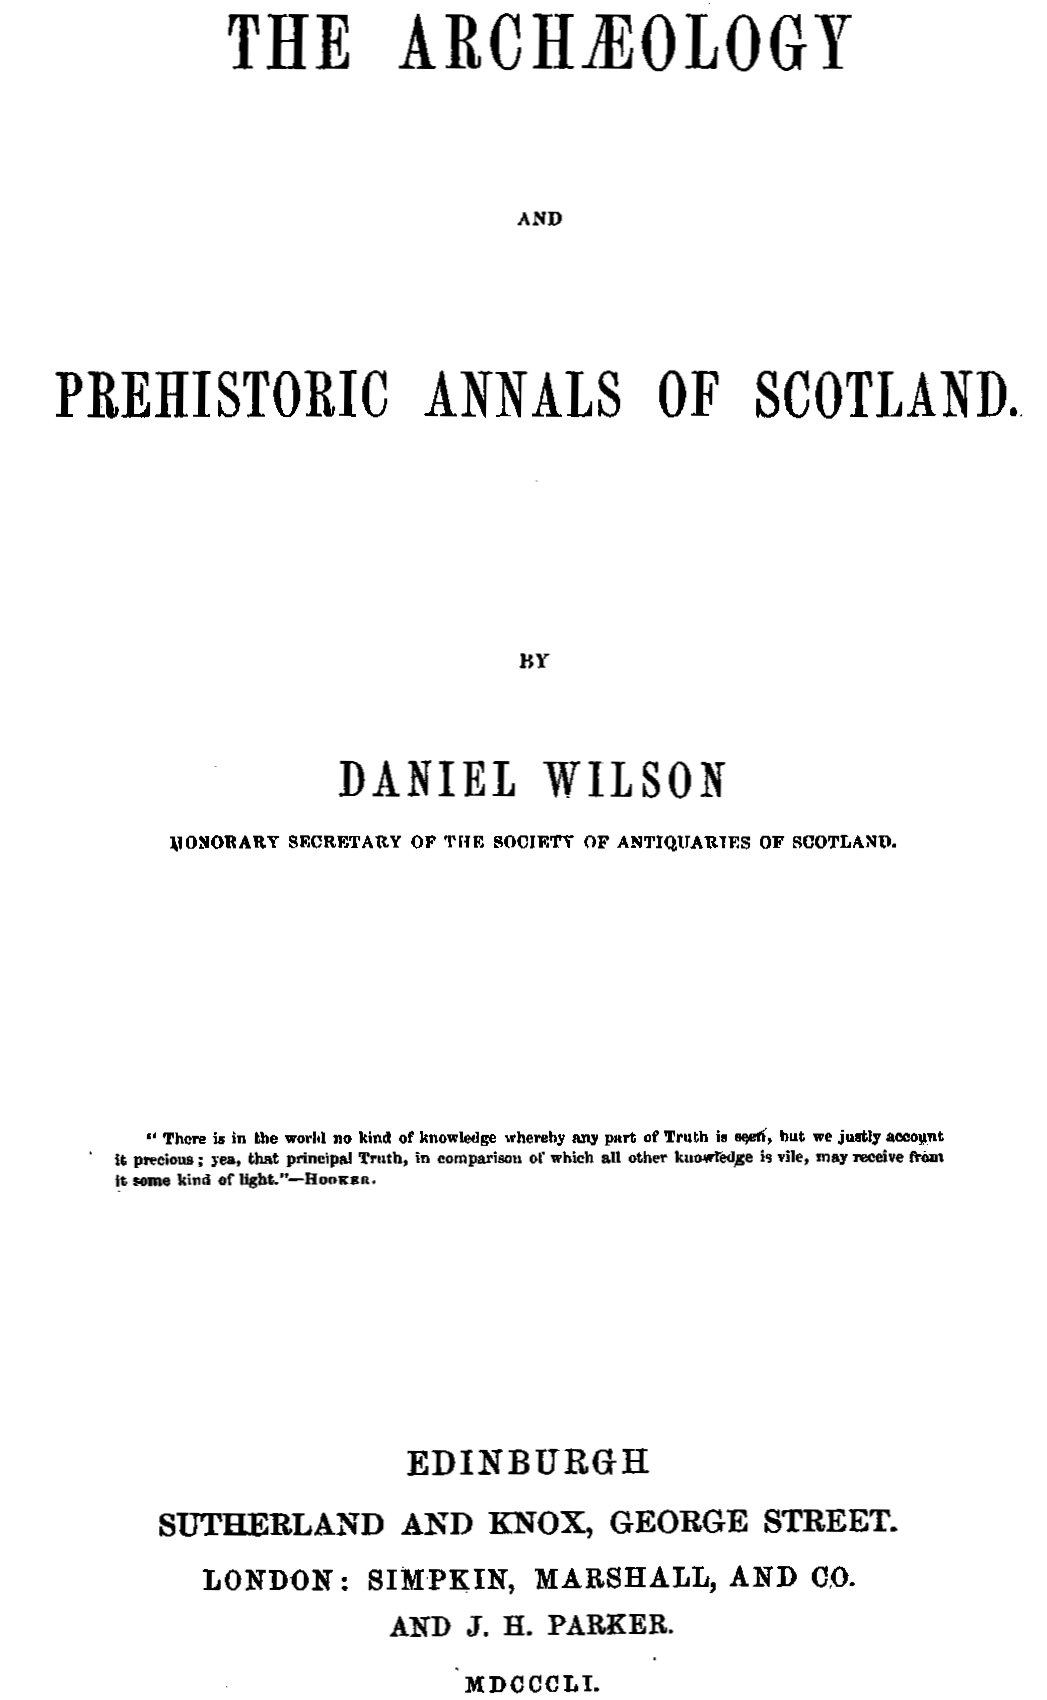 The archæology and prehistoric annals of Scotland